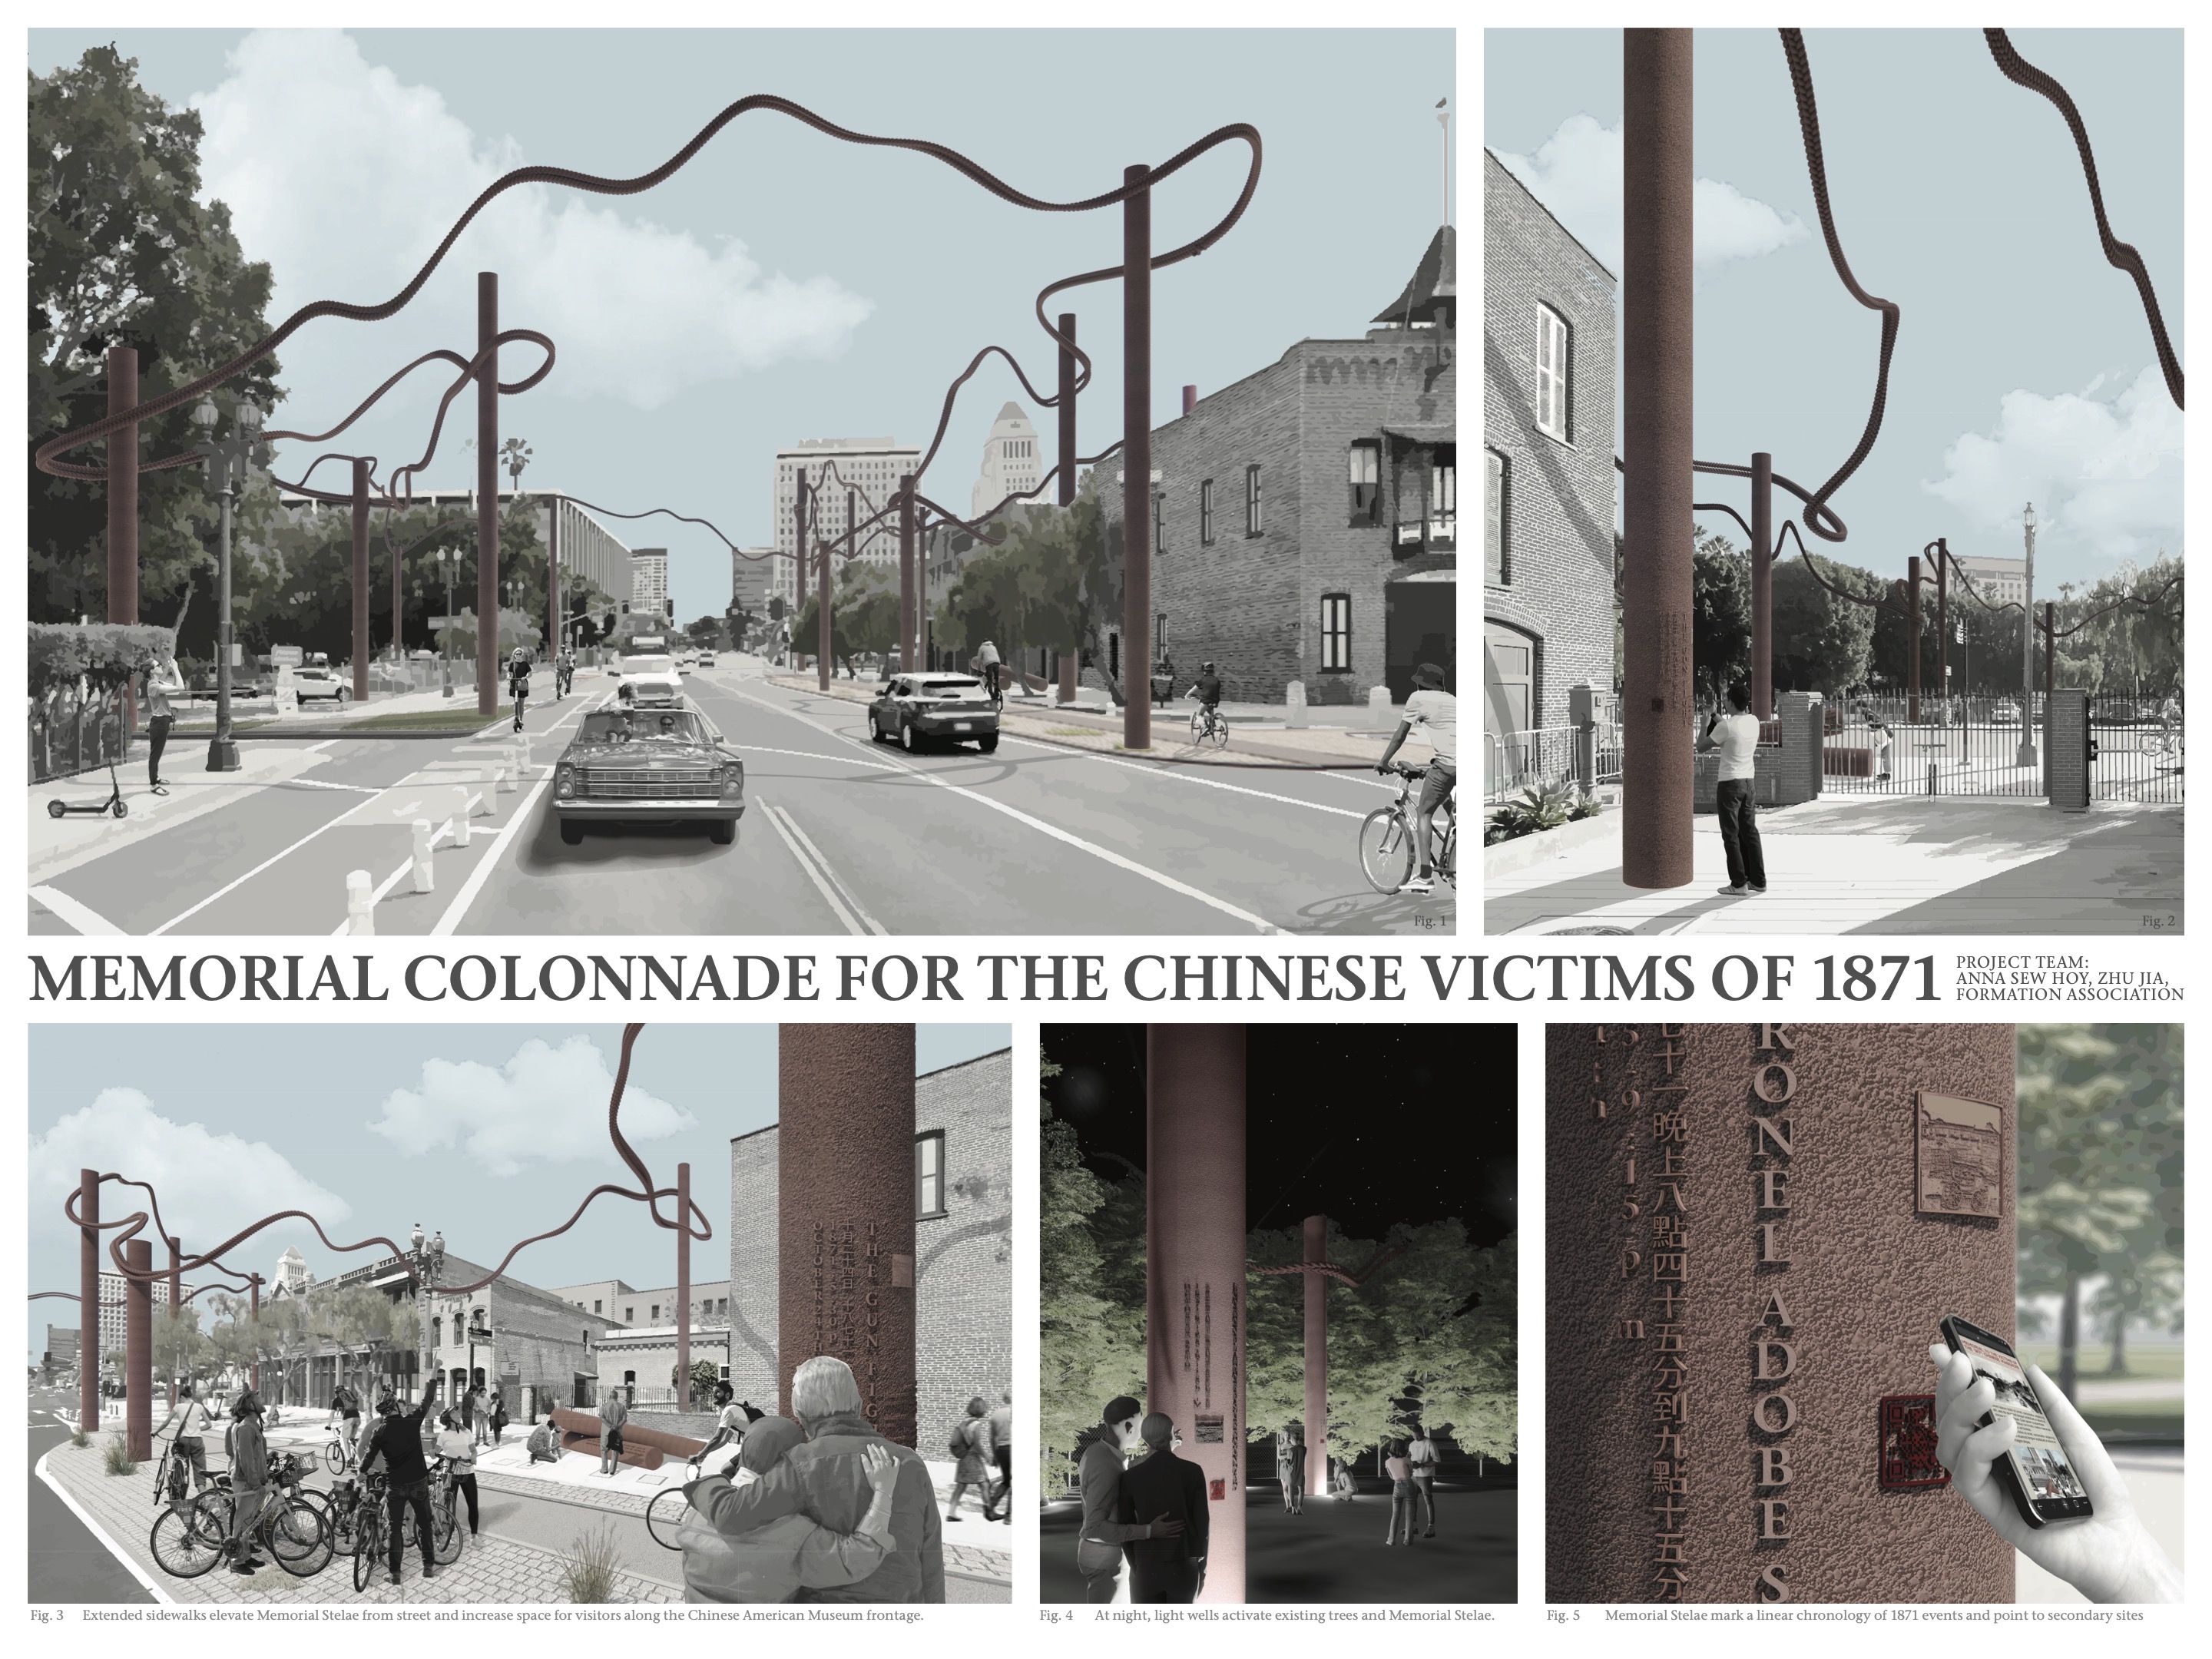 The Memorial Colonnade by Anna Sew Hoy, Zhu Jia and Formation Association / Courtesy City of Los Angeles Department of Cultural Affairs.